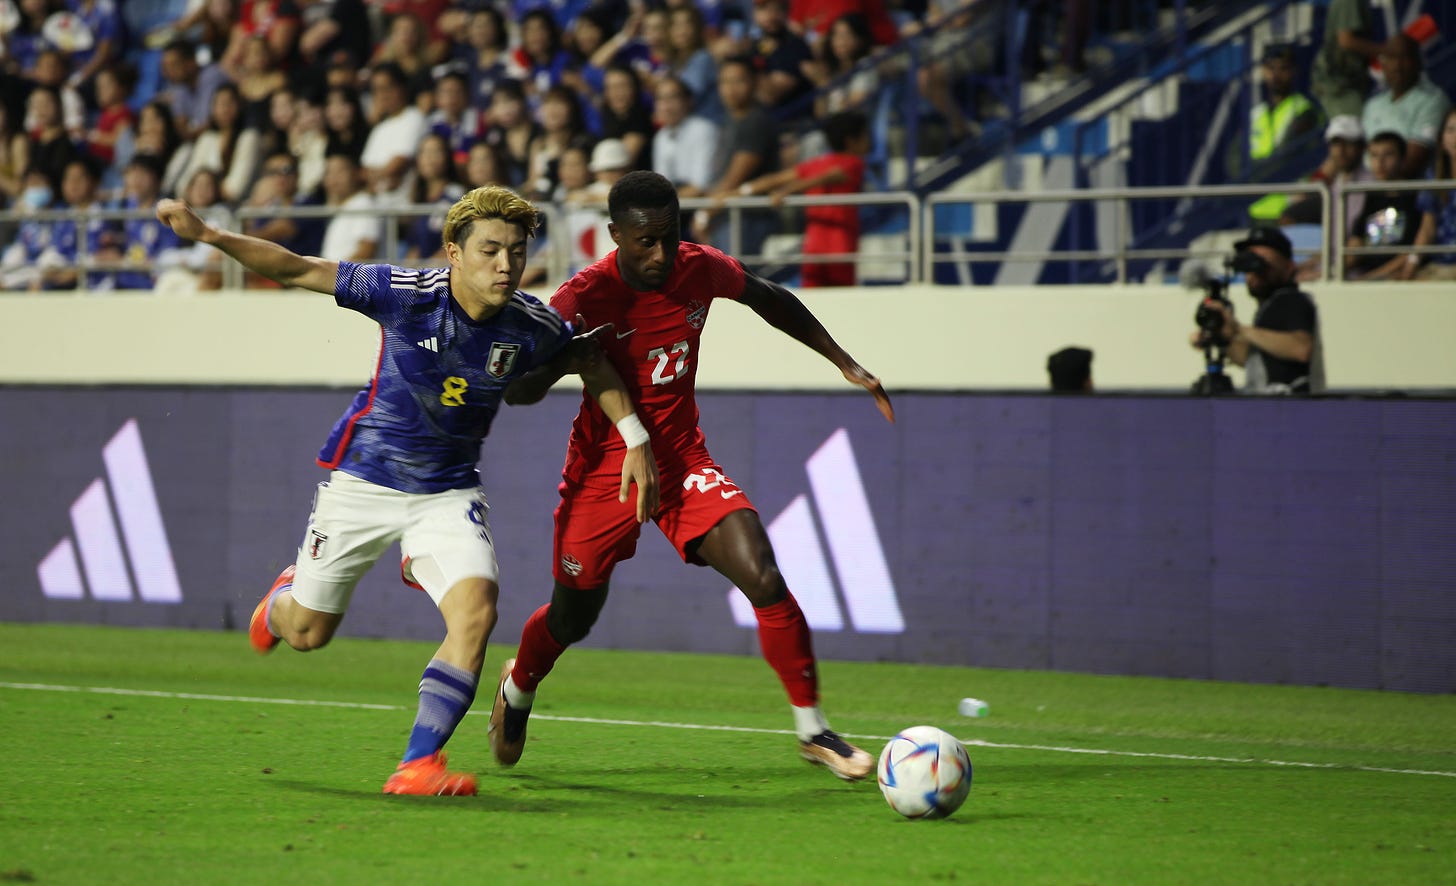 Japanese footballer Ritsu Doan chases Canadian footballer Richie Laryea on the pitch, with the ball ahead of them and the crowd in the background.